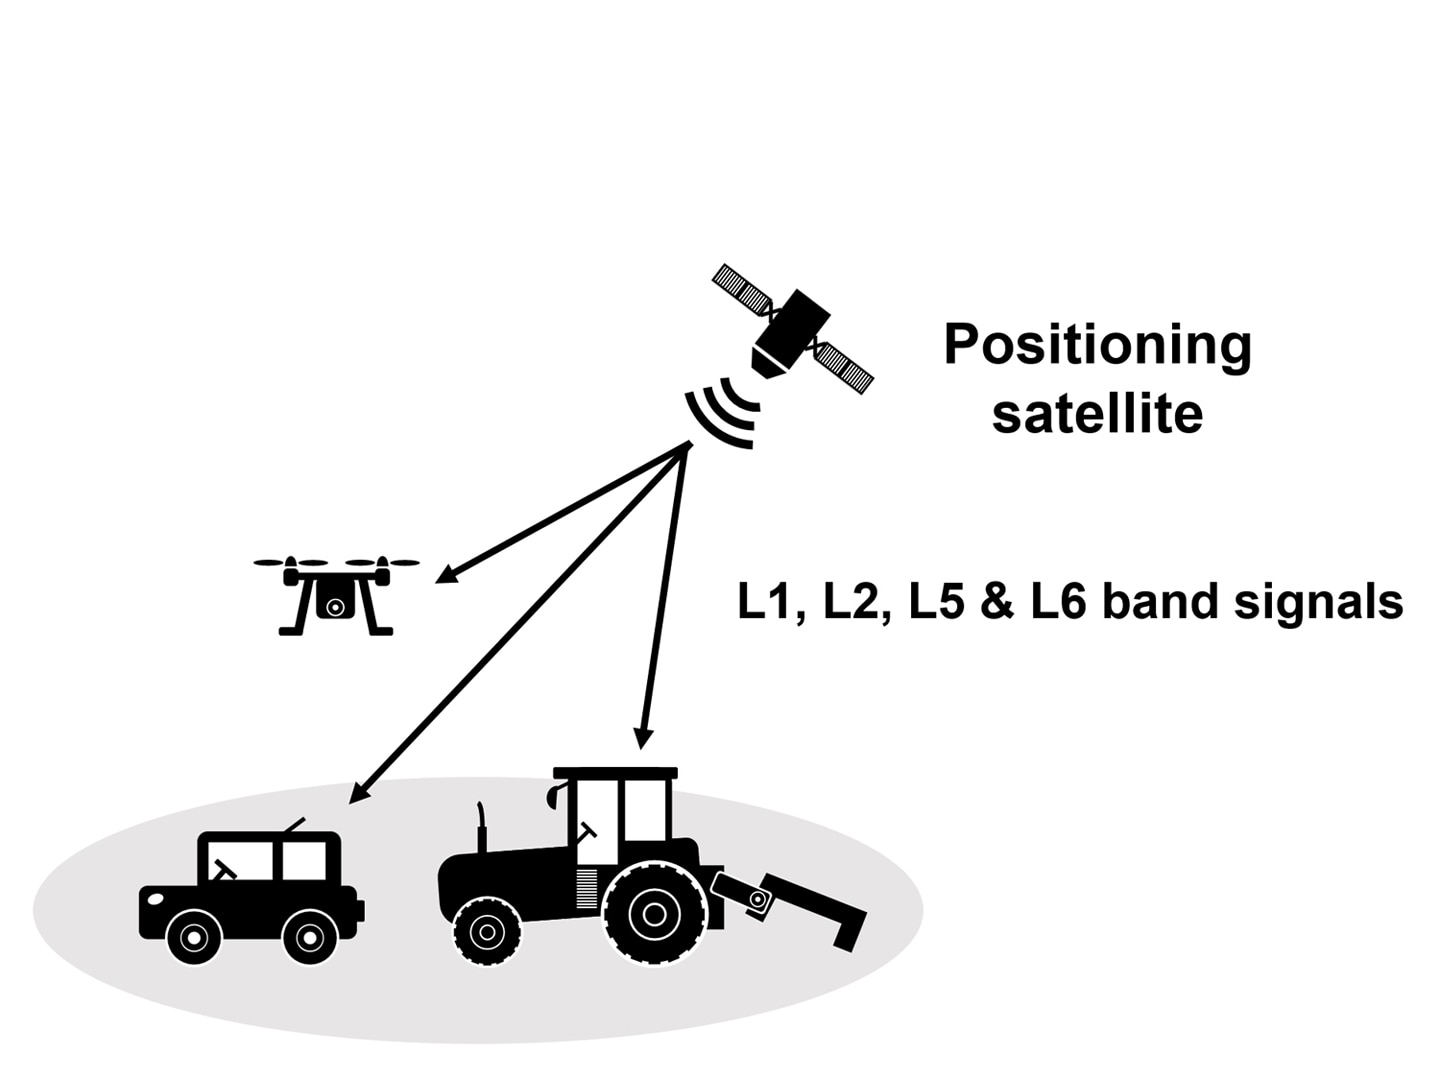 Examples of satellite-positioning applications